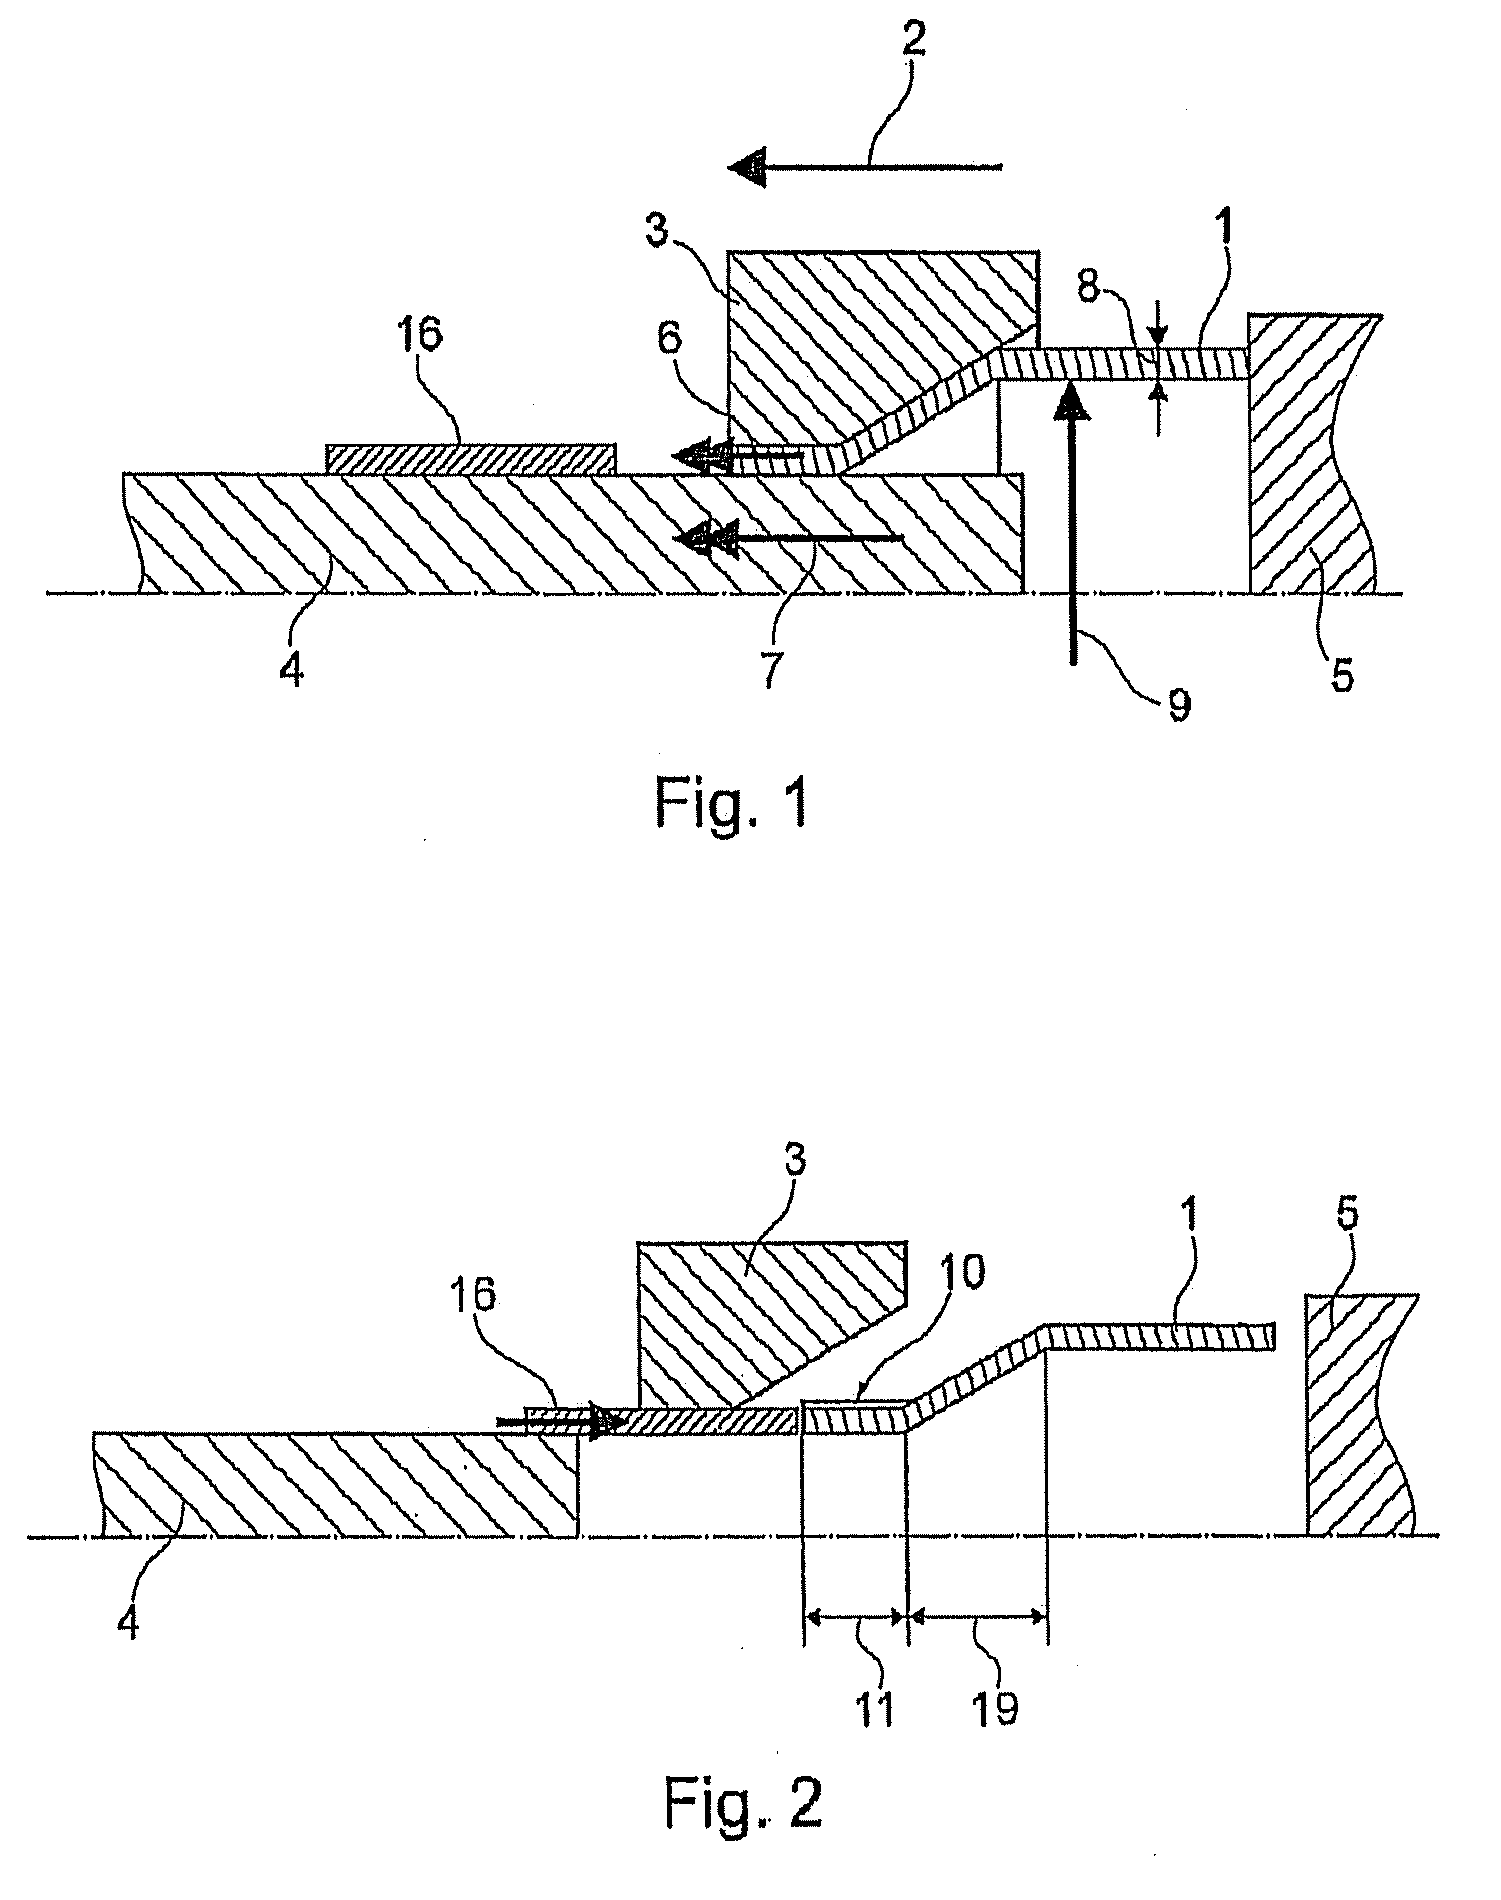 Method for forming hollow profiles